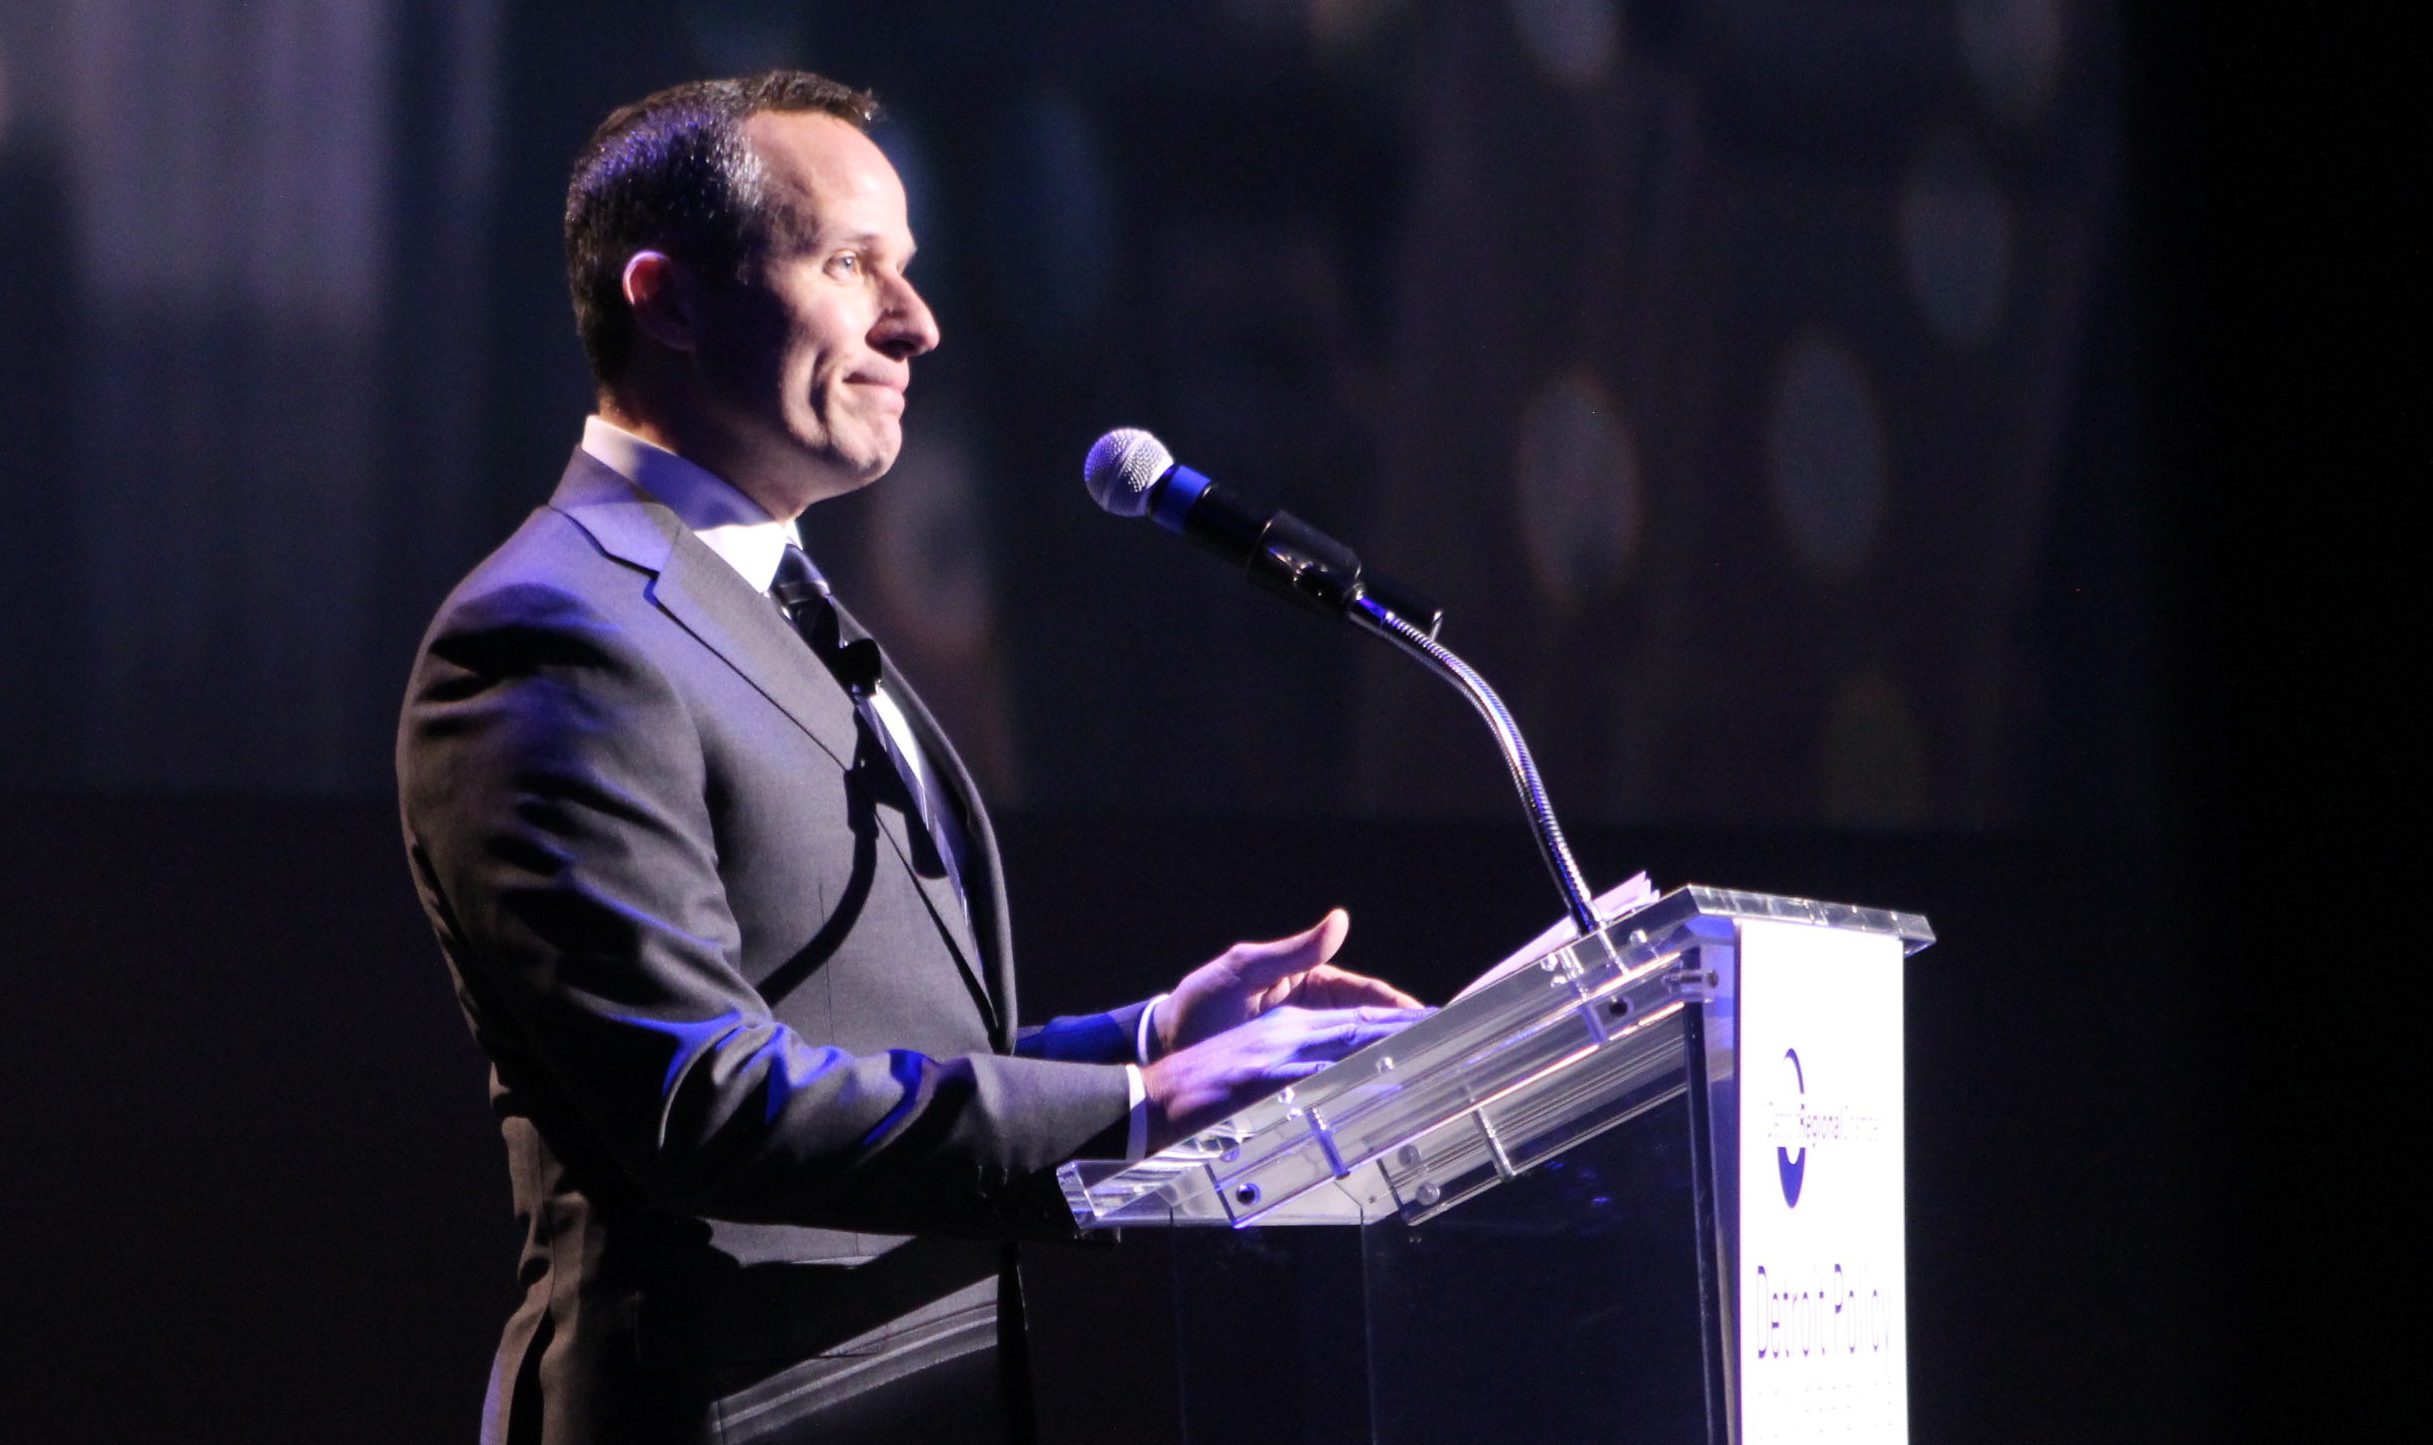 Chris Ilitch speaks at the 2017 Detroit Policy Conference